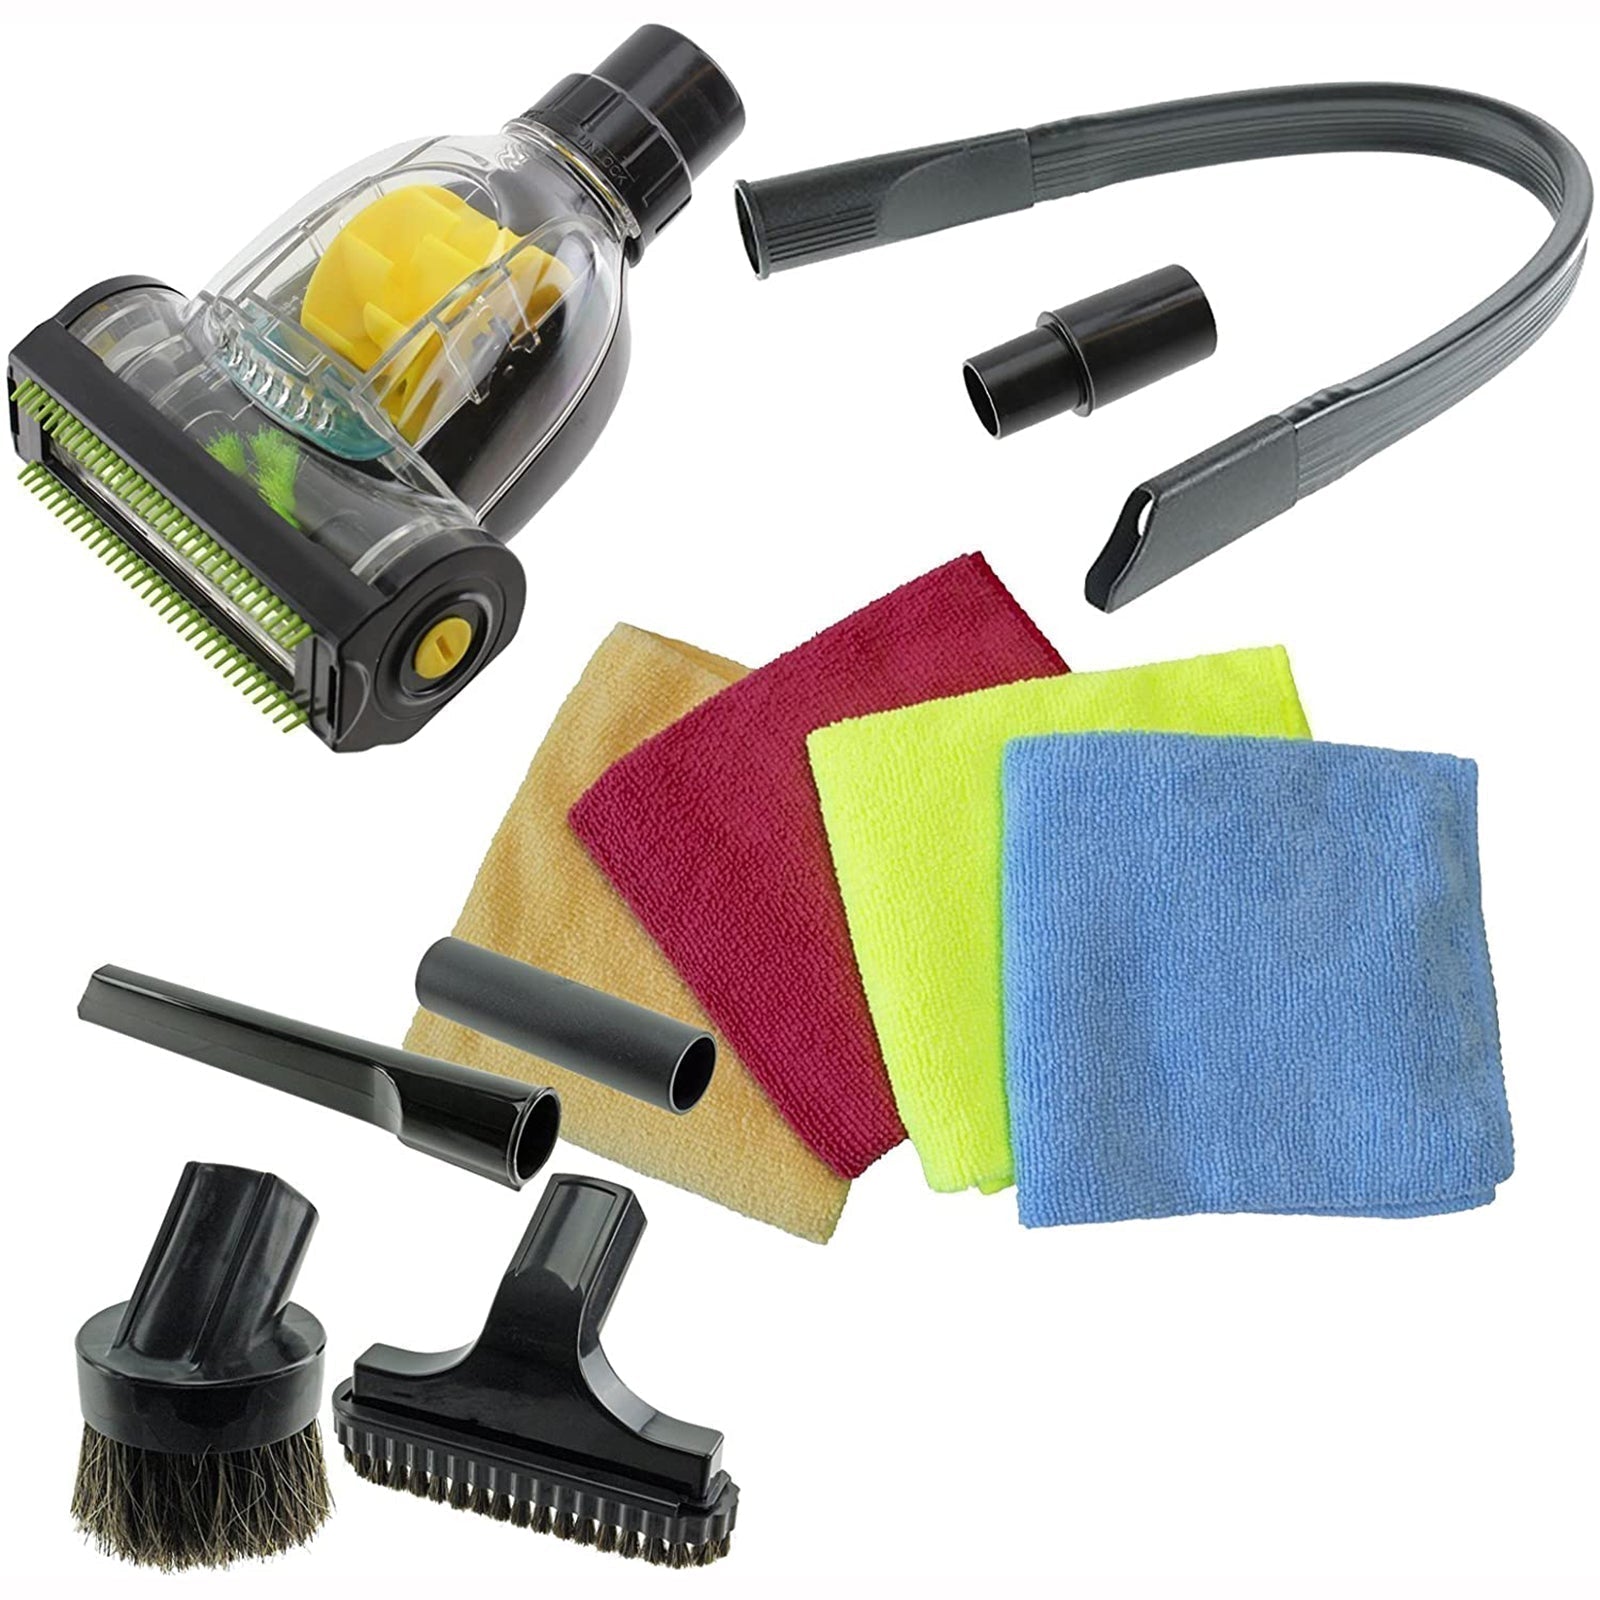 Car Valet Cleaning Tool Kit compatible with HITACHI Vacuum Cleaner (32mm/35mm)